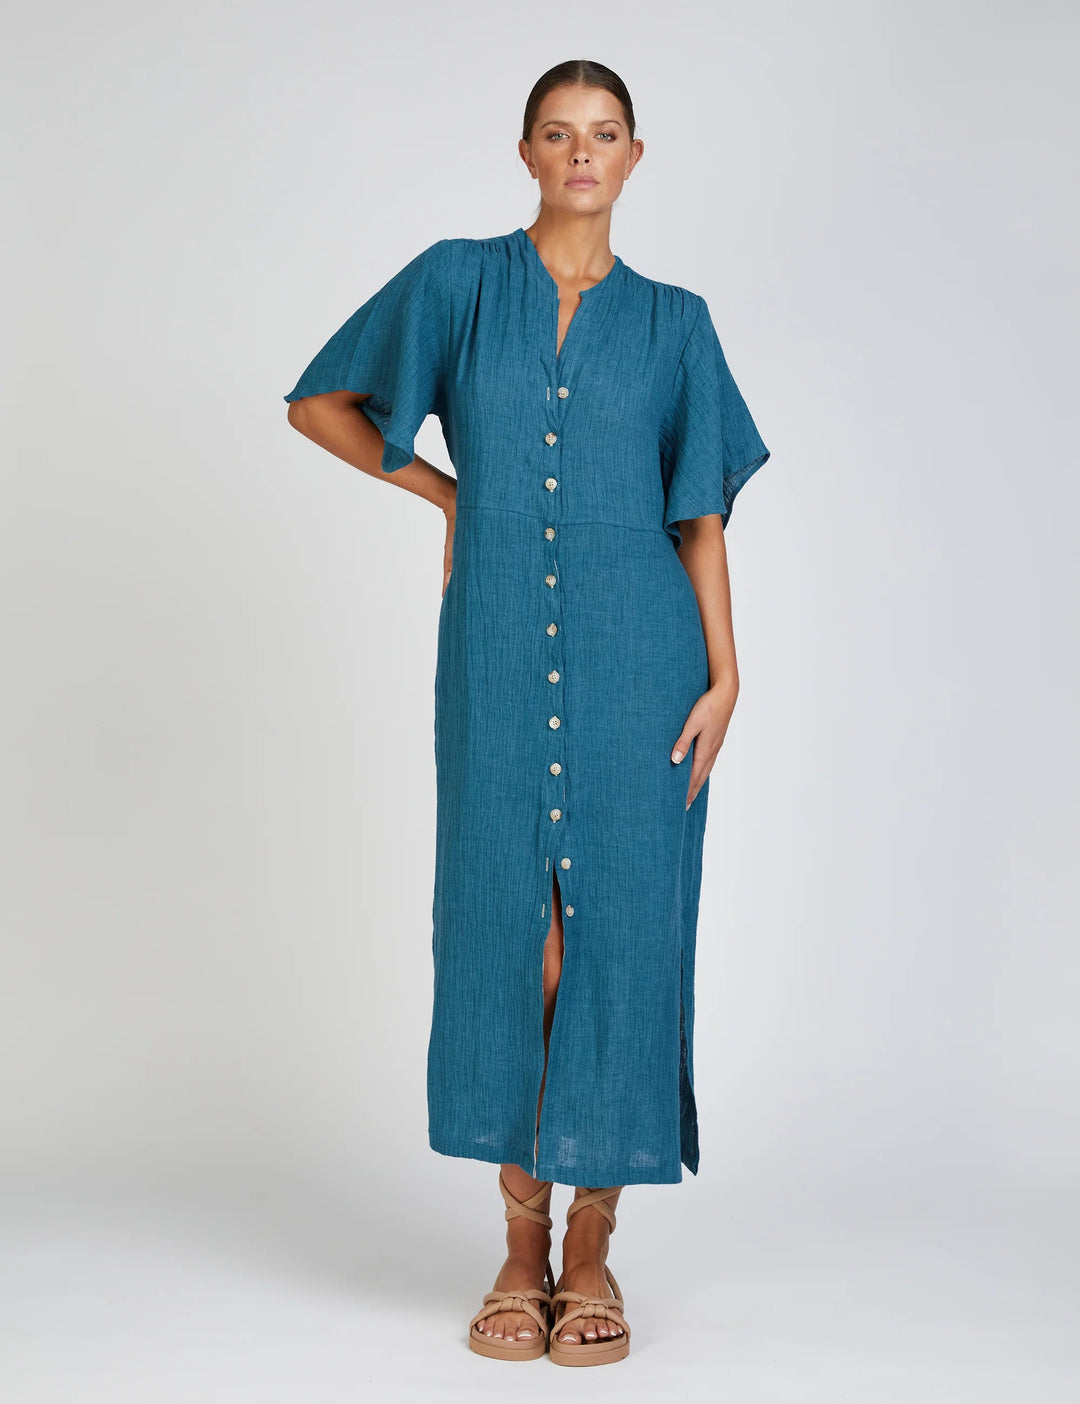 Sac | Ayra Bell Sleeve Dress | Teal-Suzie Anderson Home